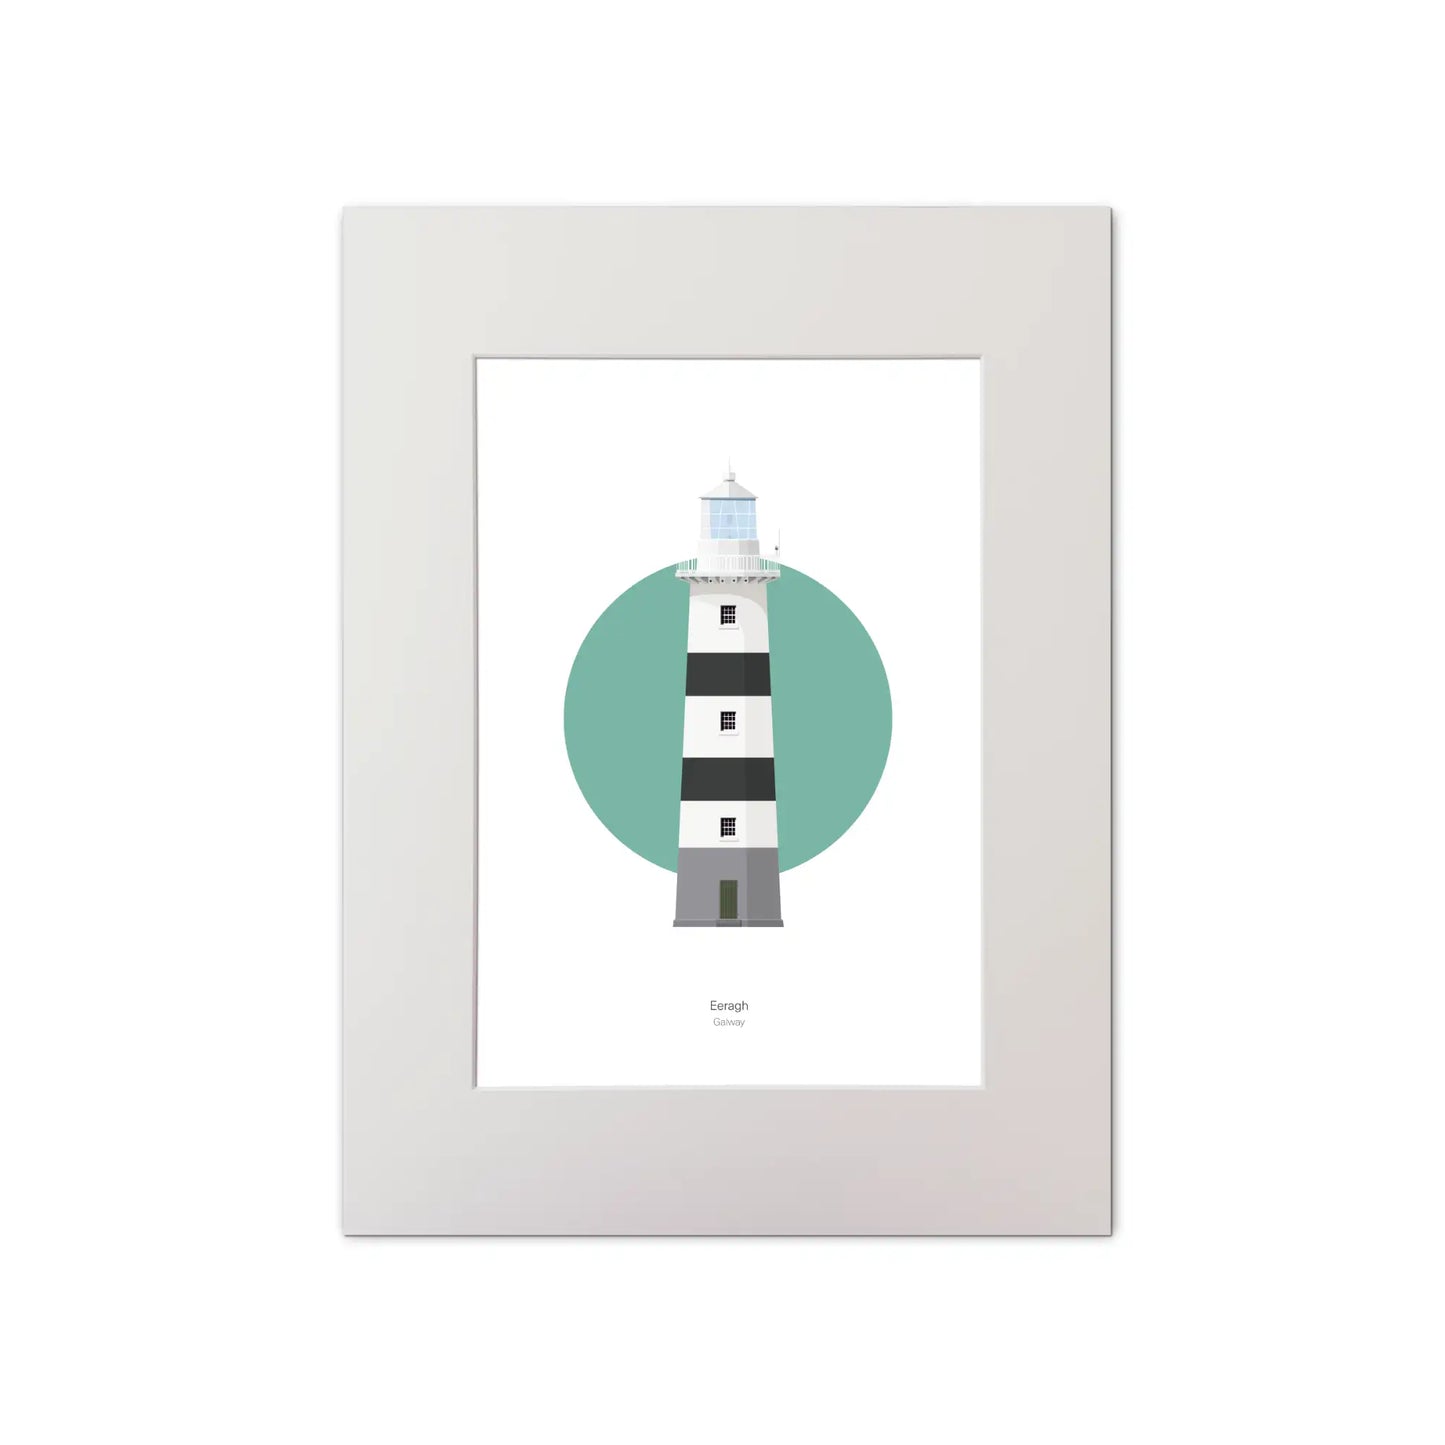 Contemporary graphic illustration of Eeragh lighthouse on a white background inside light blue square, mounted and measuring 30x40cm.